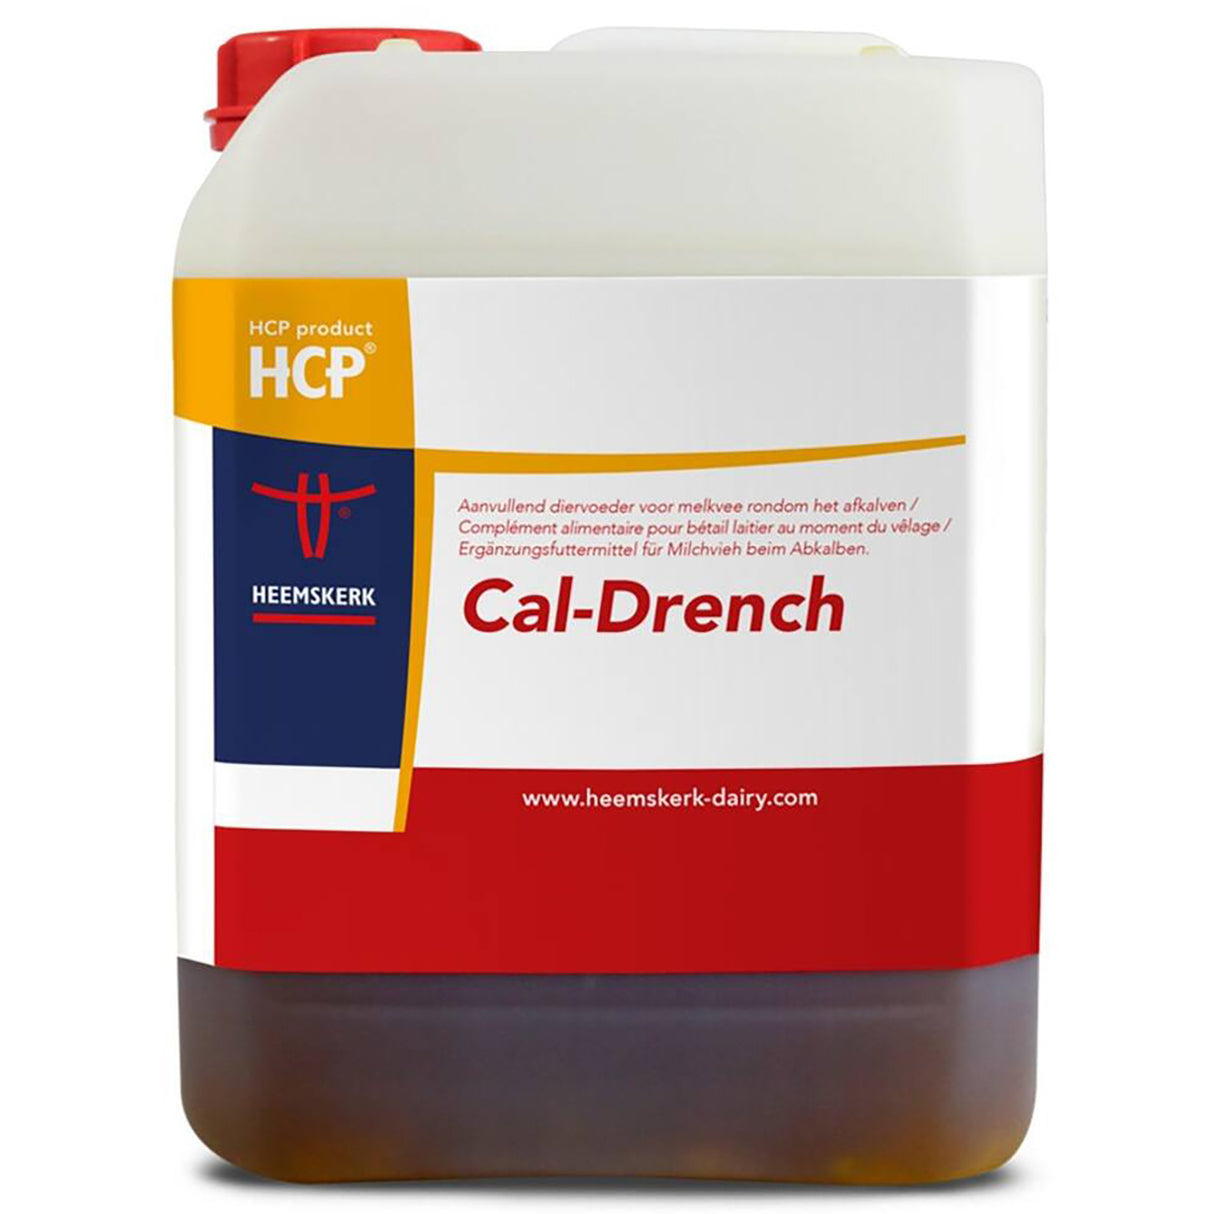 Cal-Drench: DRENCH resources